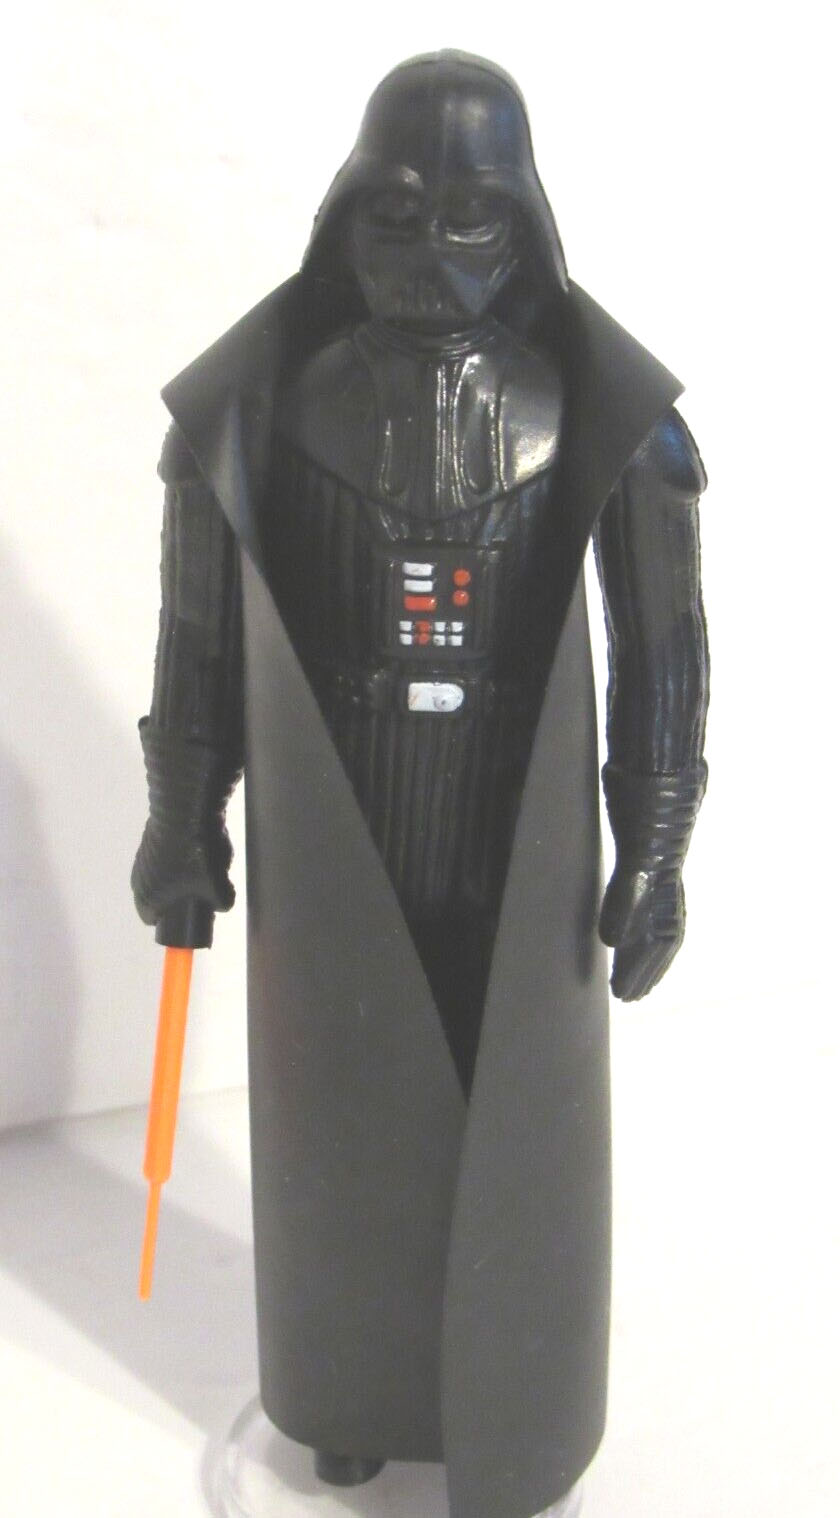 Star Wars Darth Vader 3.75 Inch Action Figure - Used